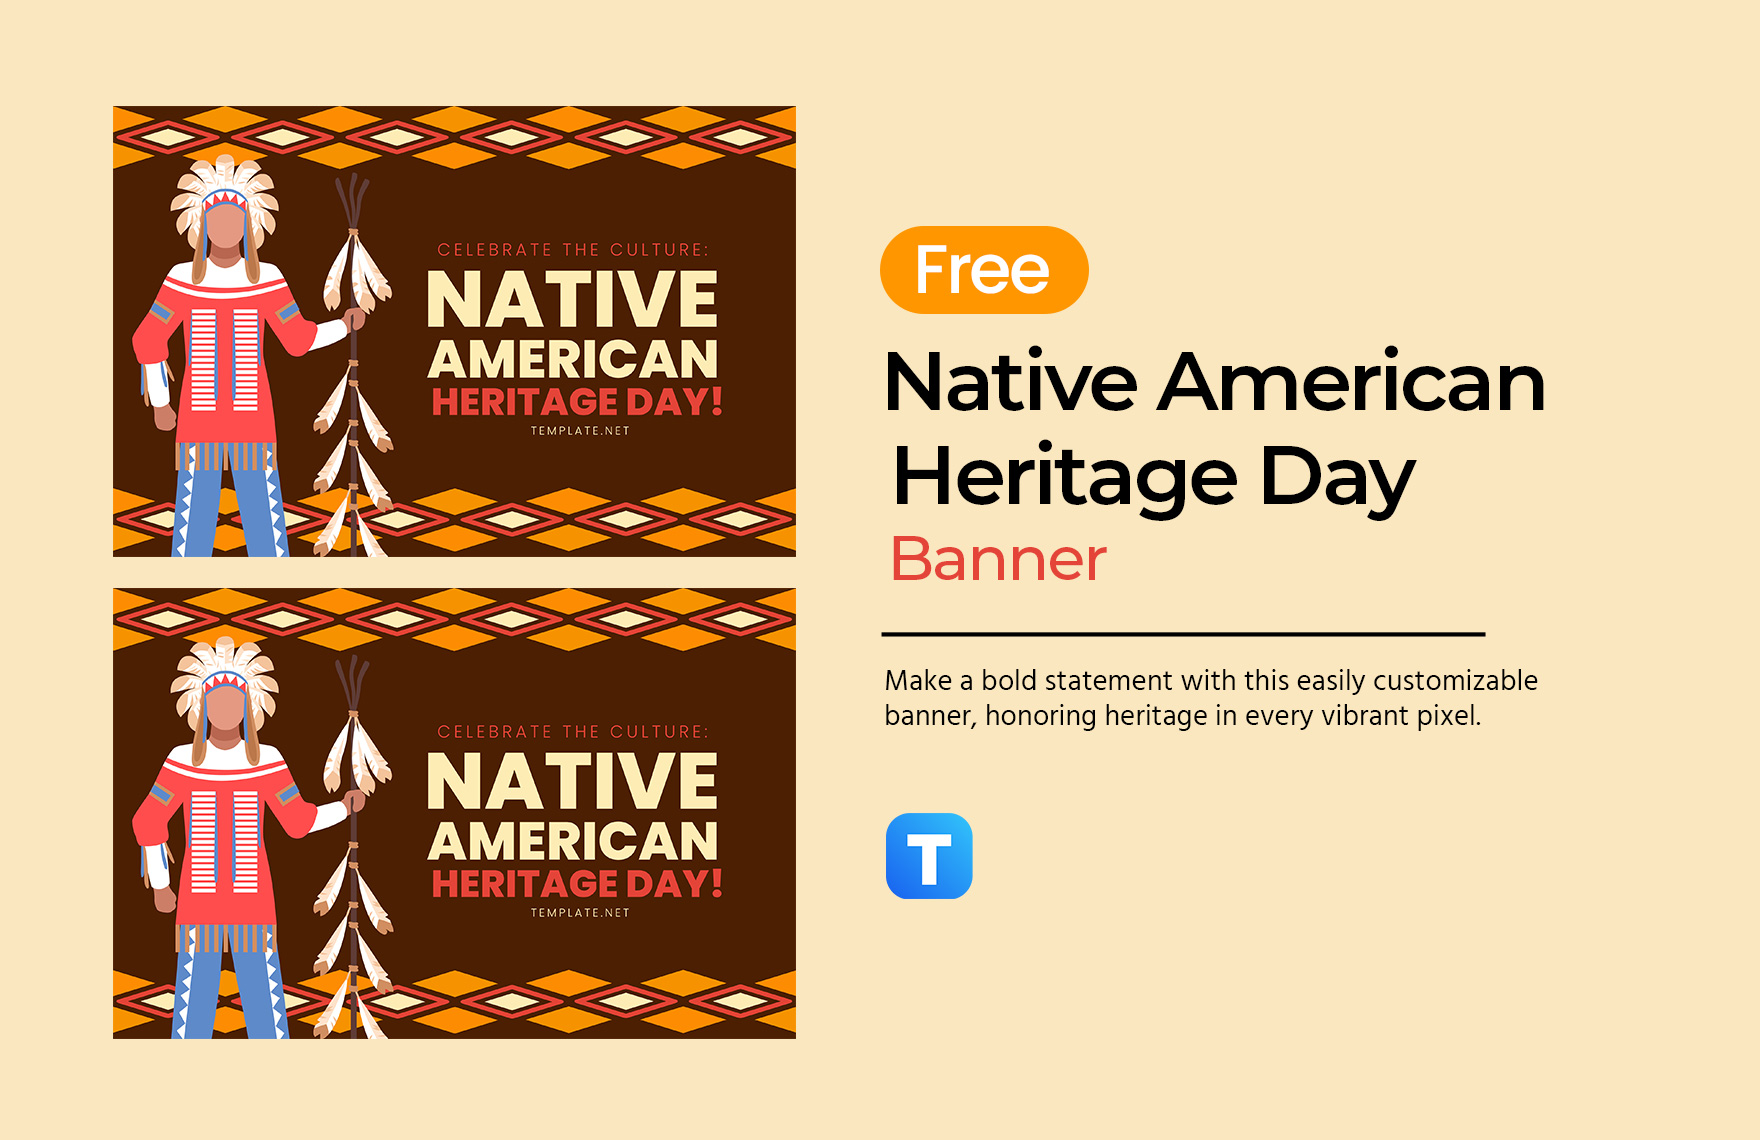 Free Native American Heritage Day Banner Template